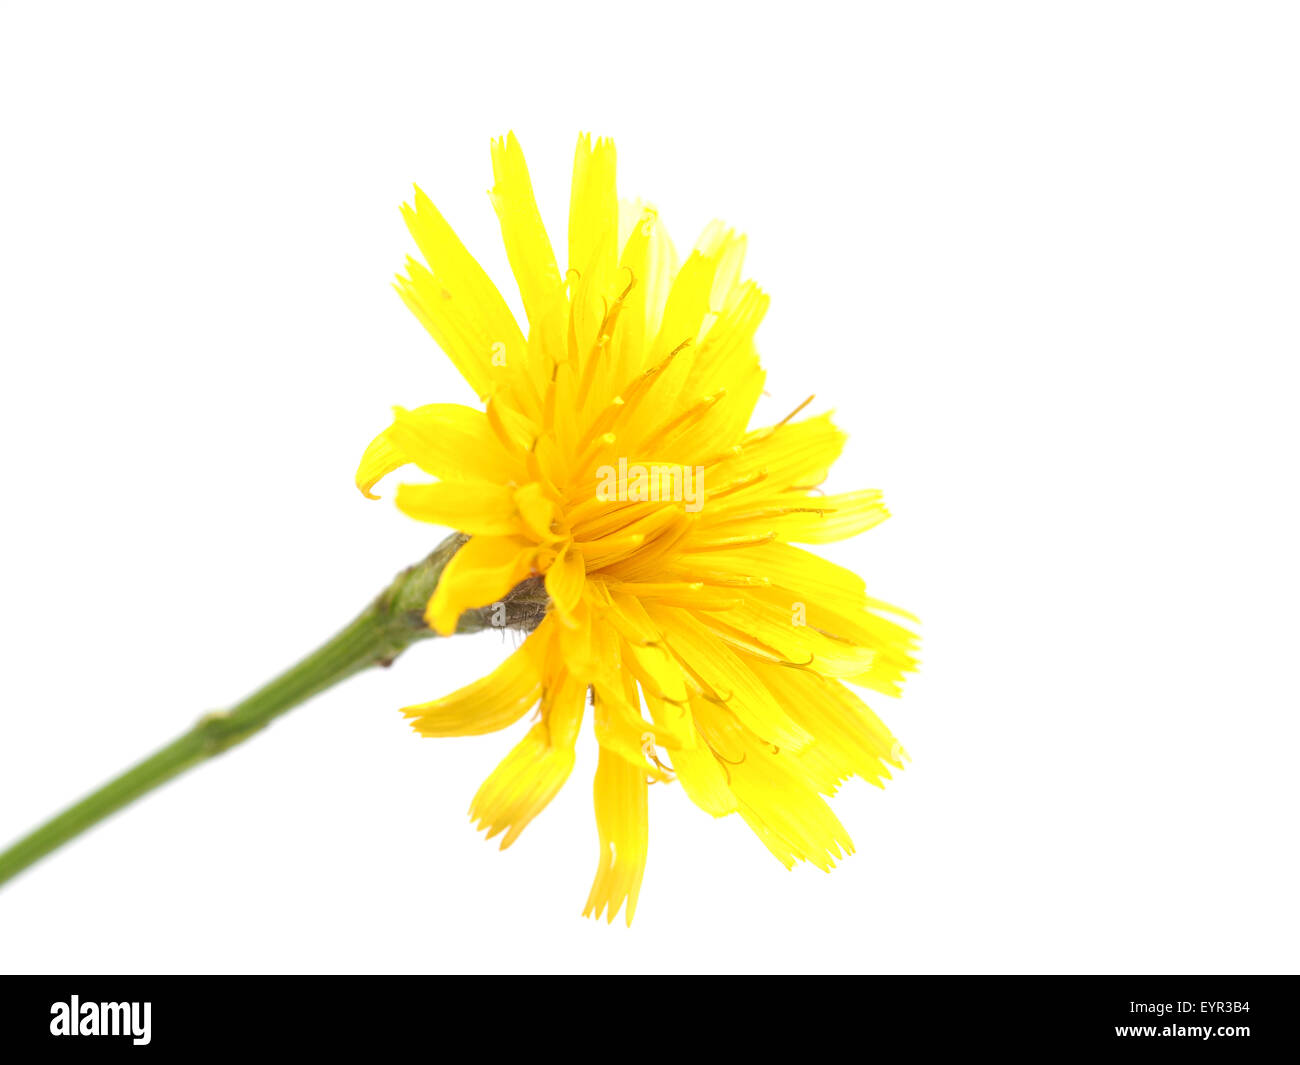 crepis flower on a white background Stock Photo